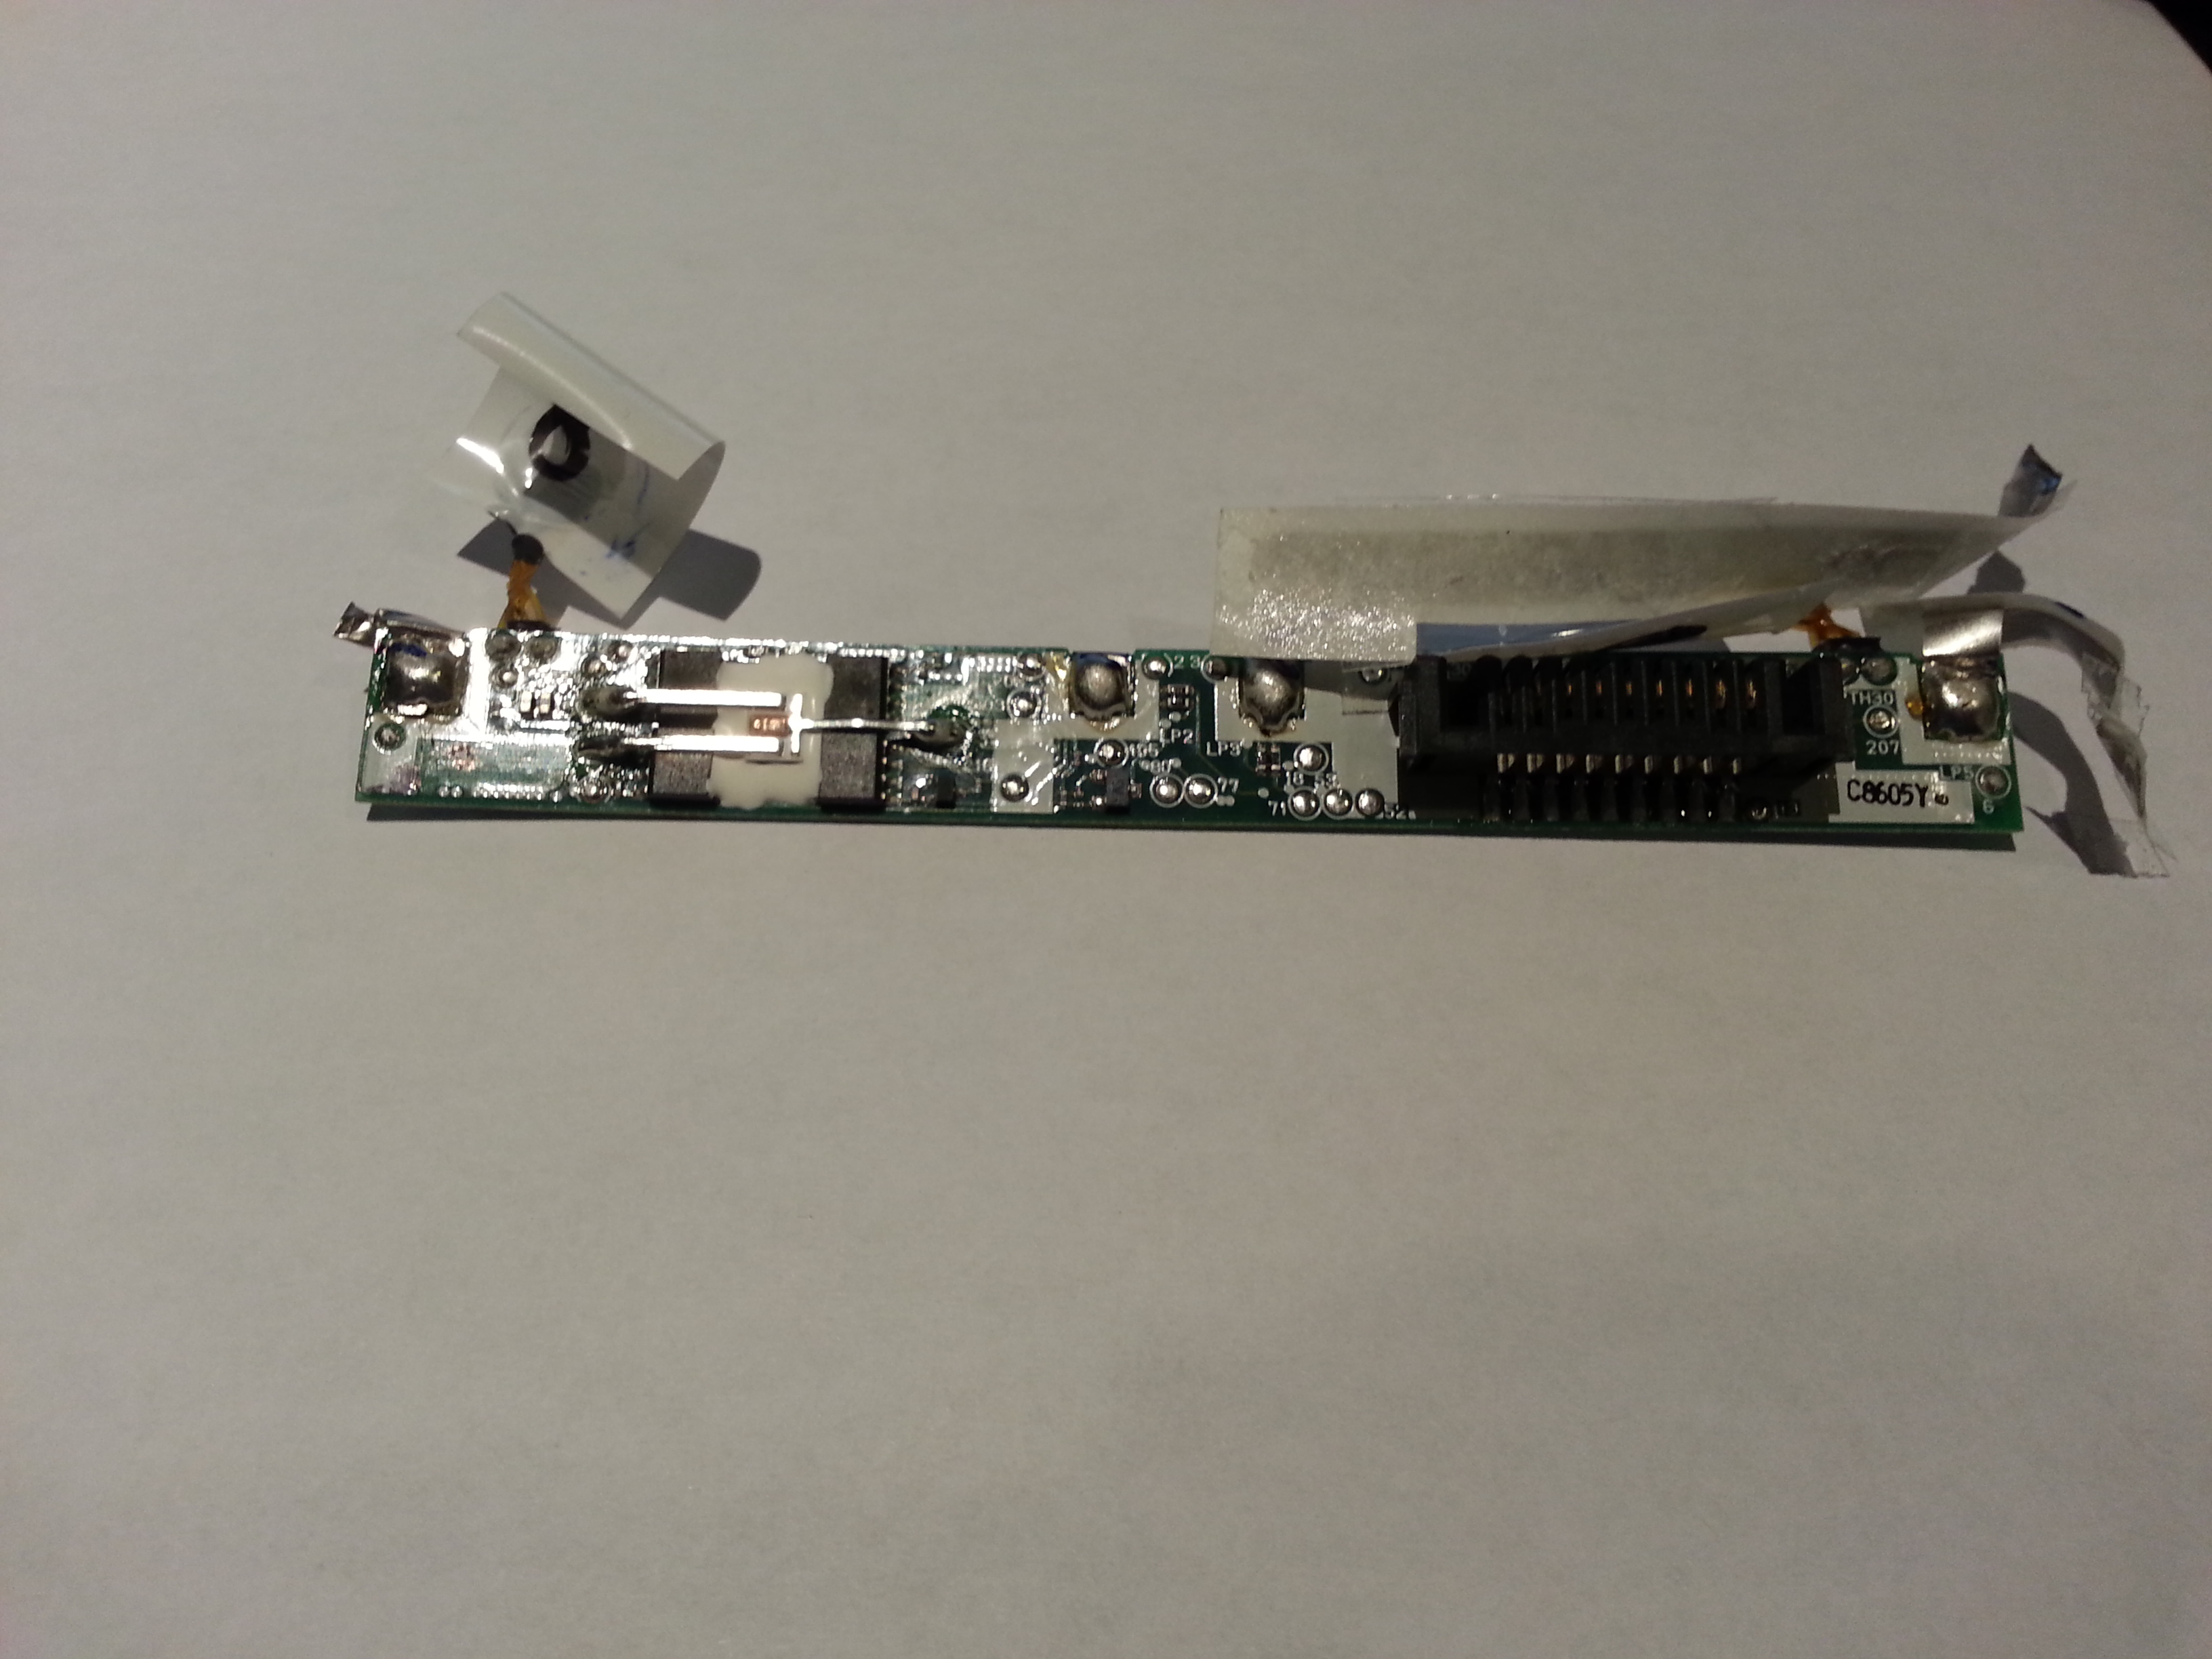 “Front” of controller board